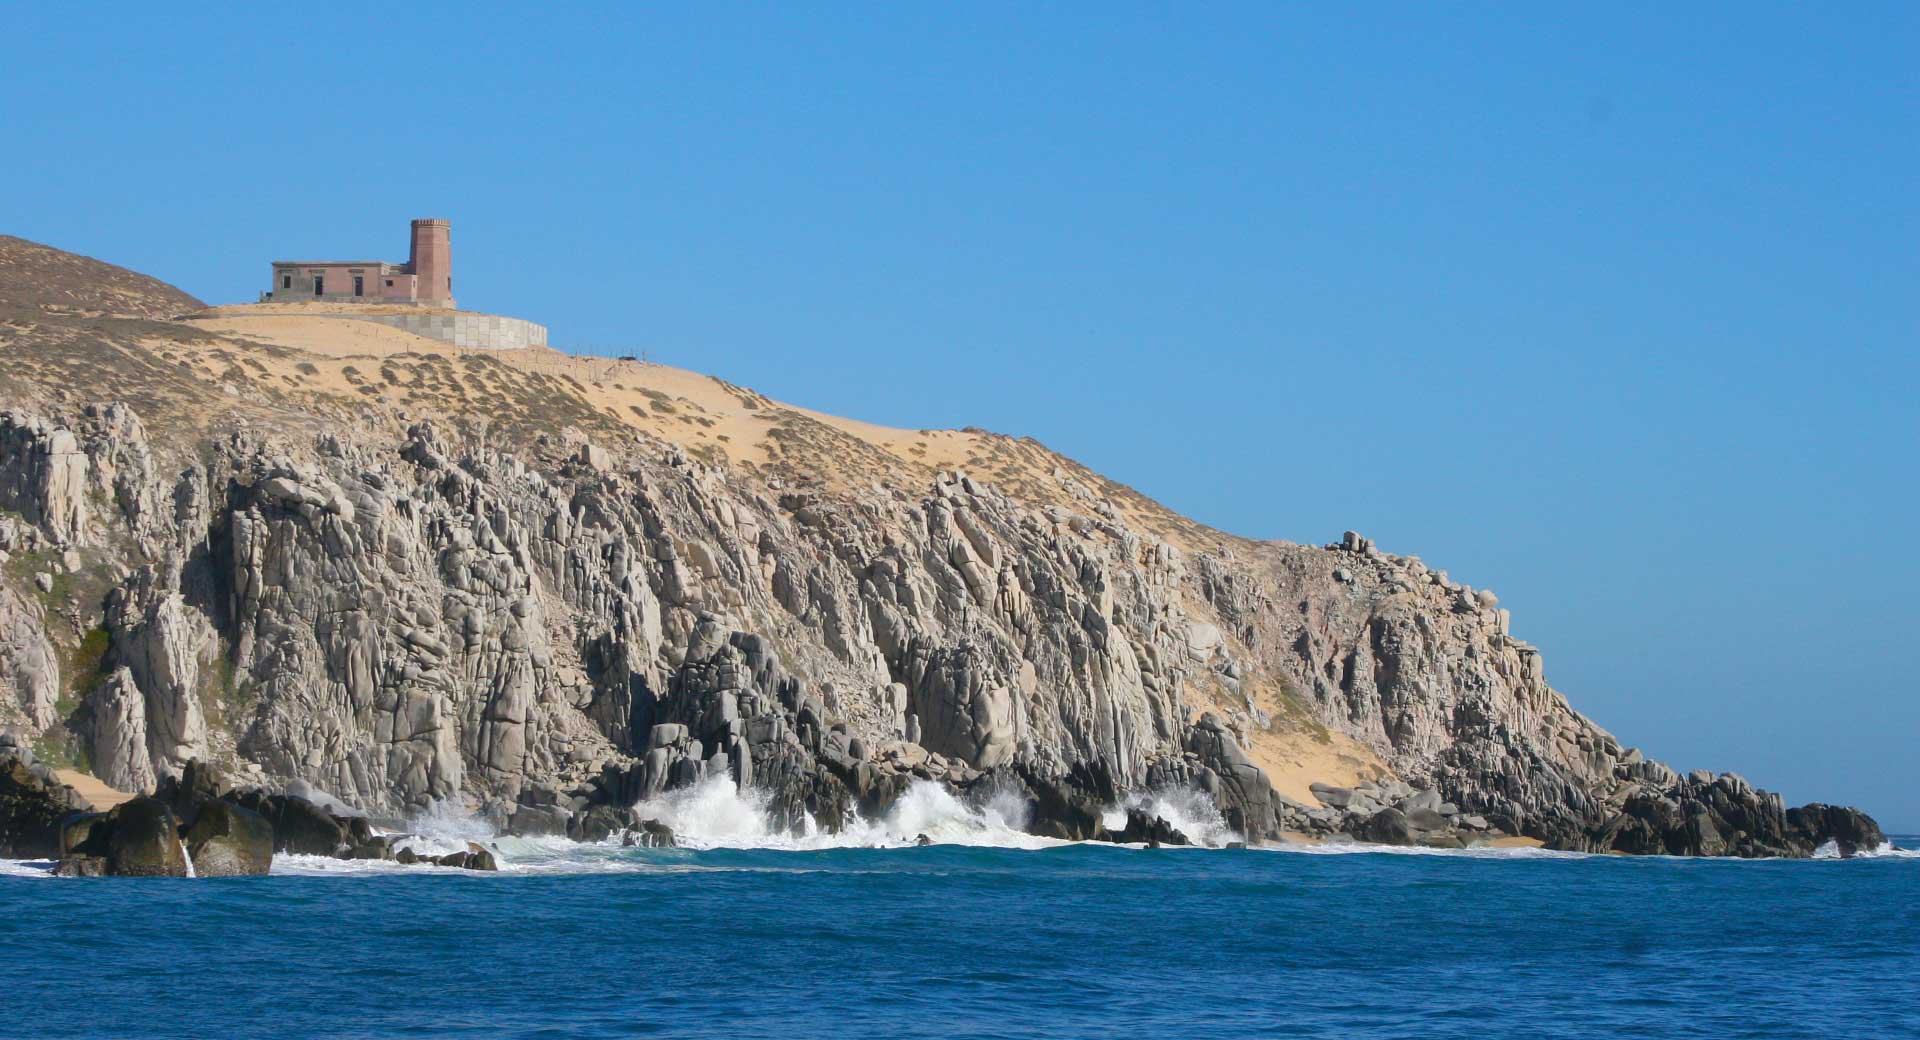 Coastal tour to Old Lighthouse in Cabo